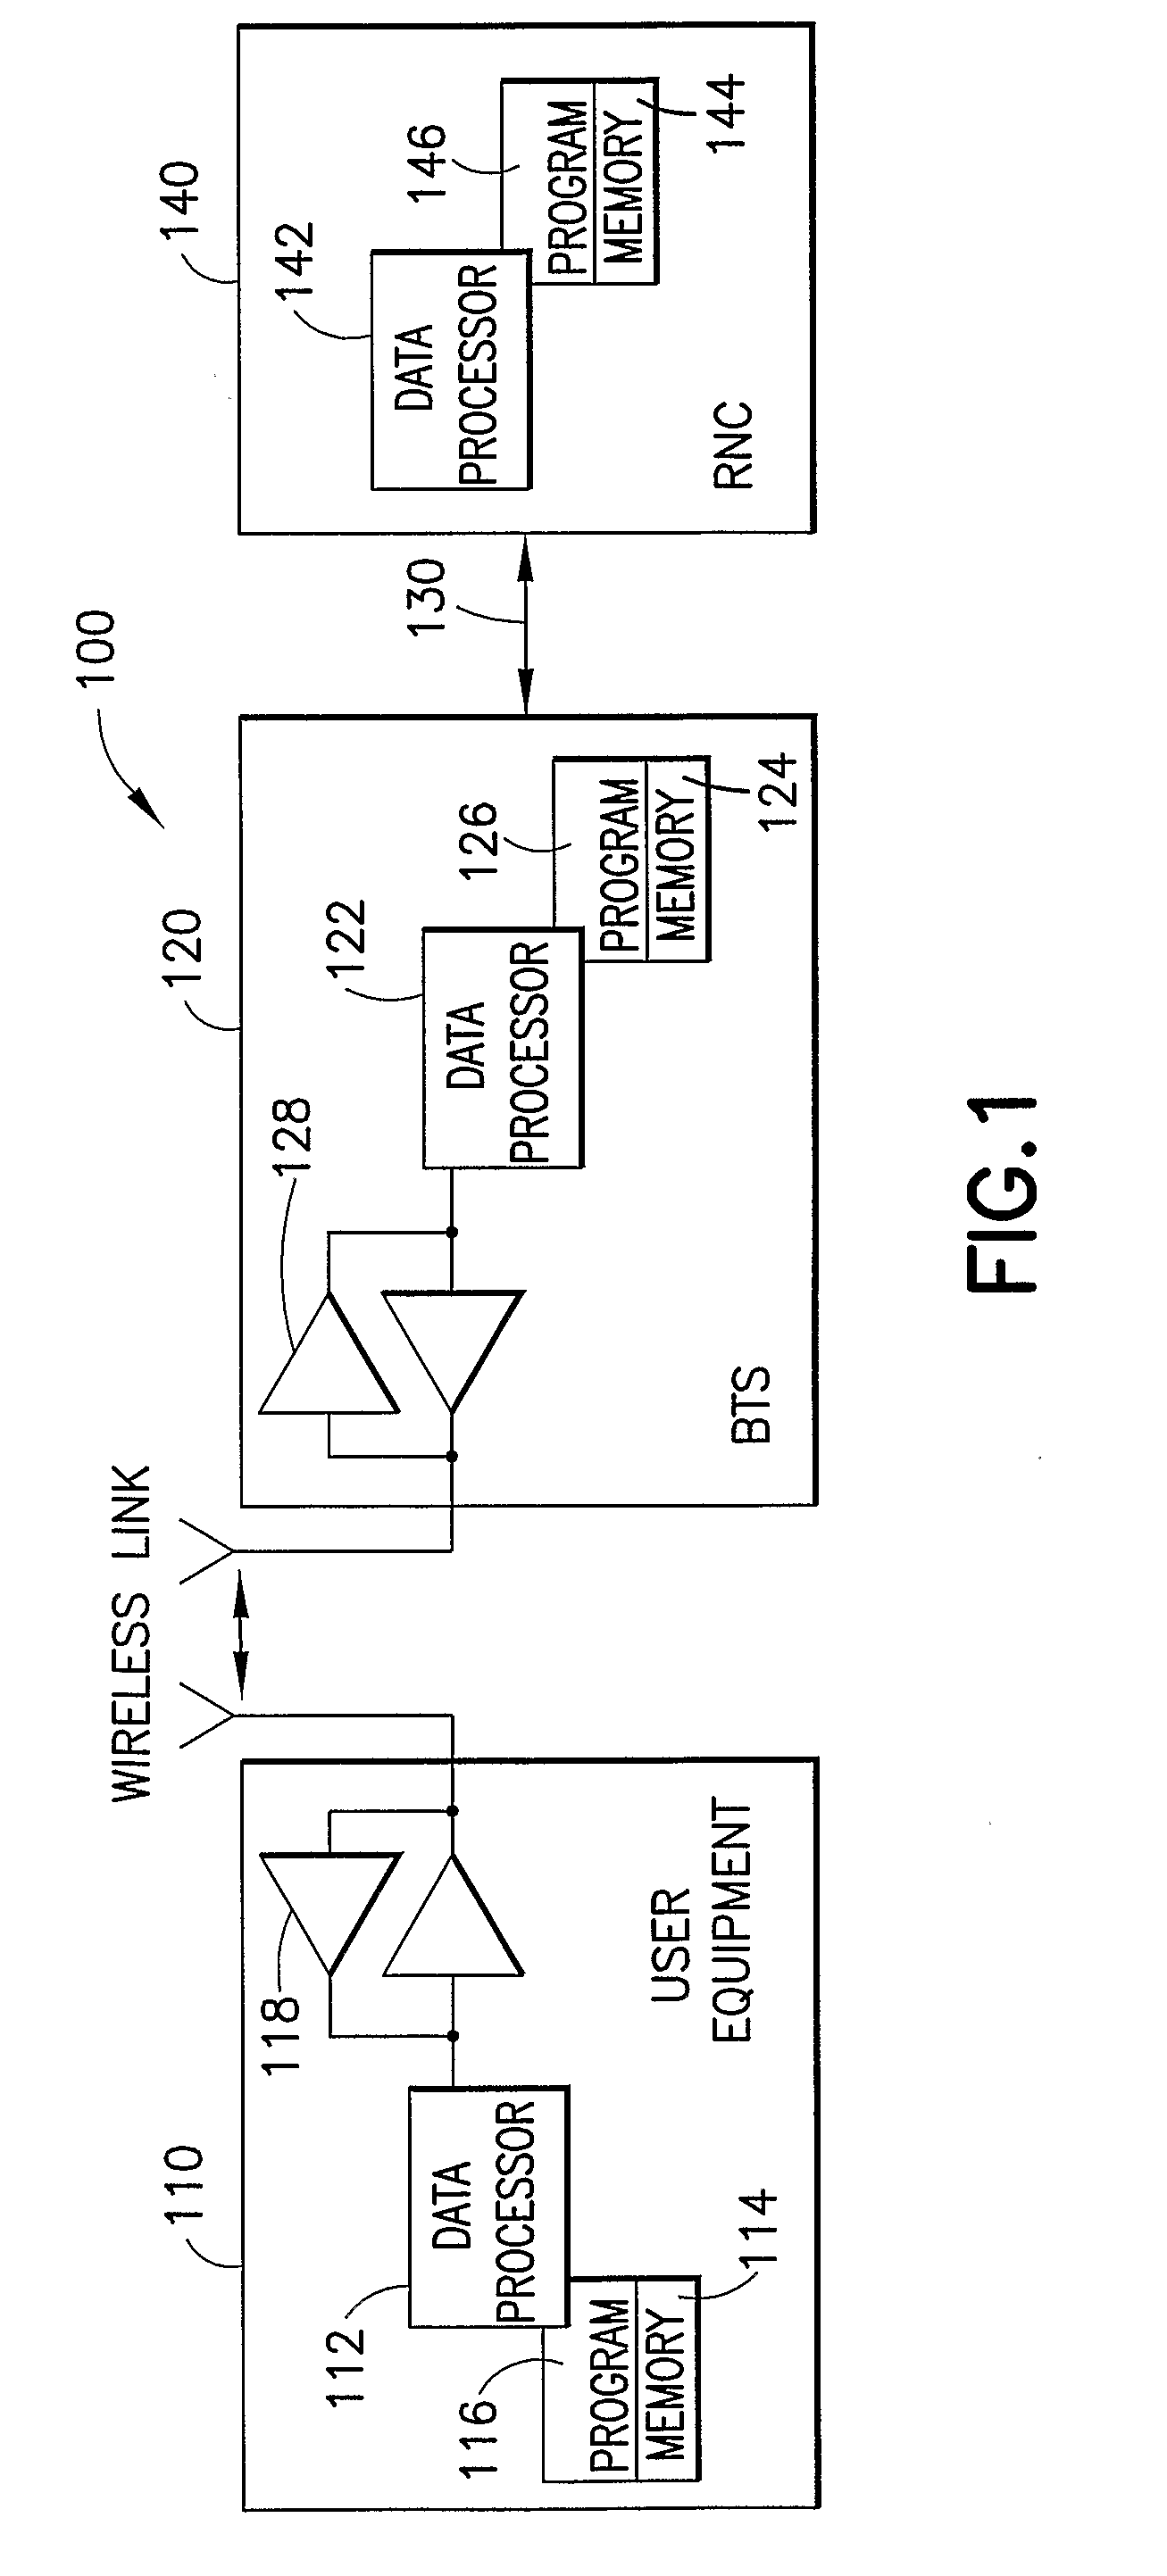 Apparatus, Method and Computer Program Product Providing Uplink Gain Factor for High Speed Uplink Packet Access